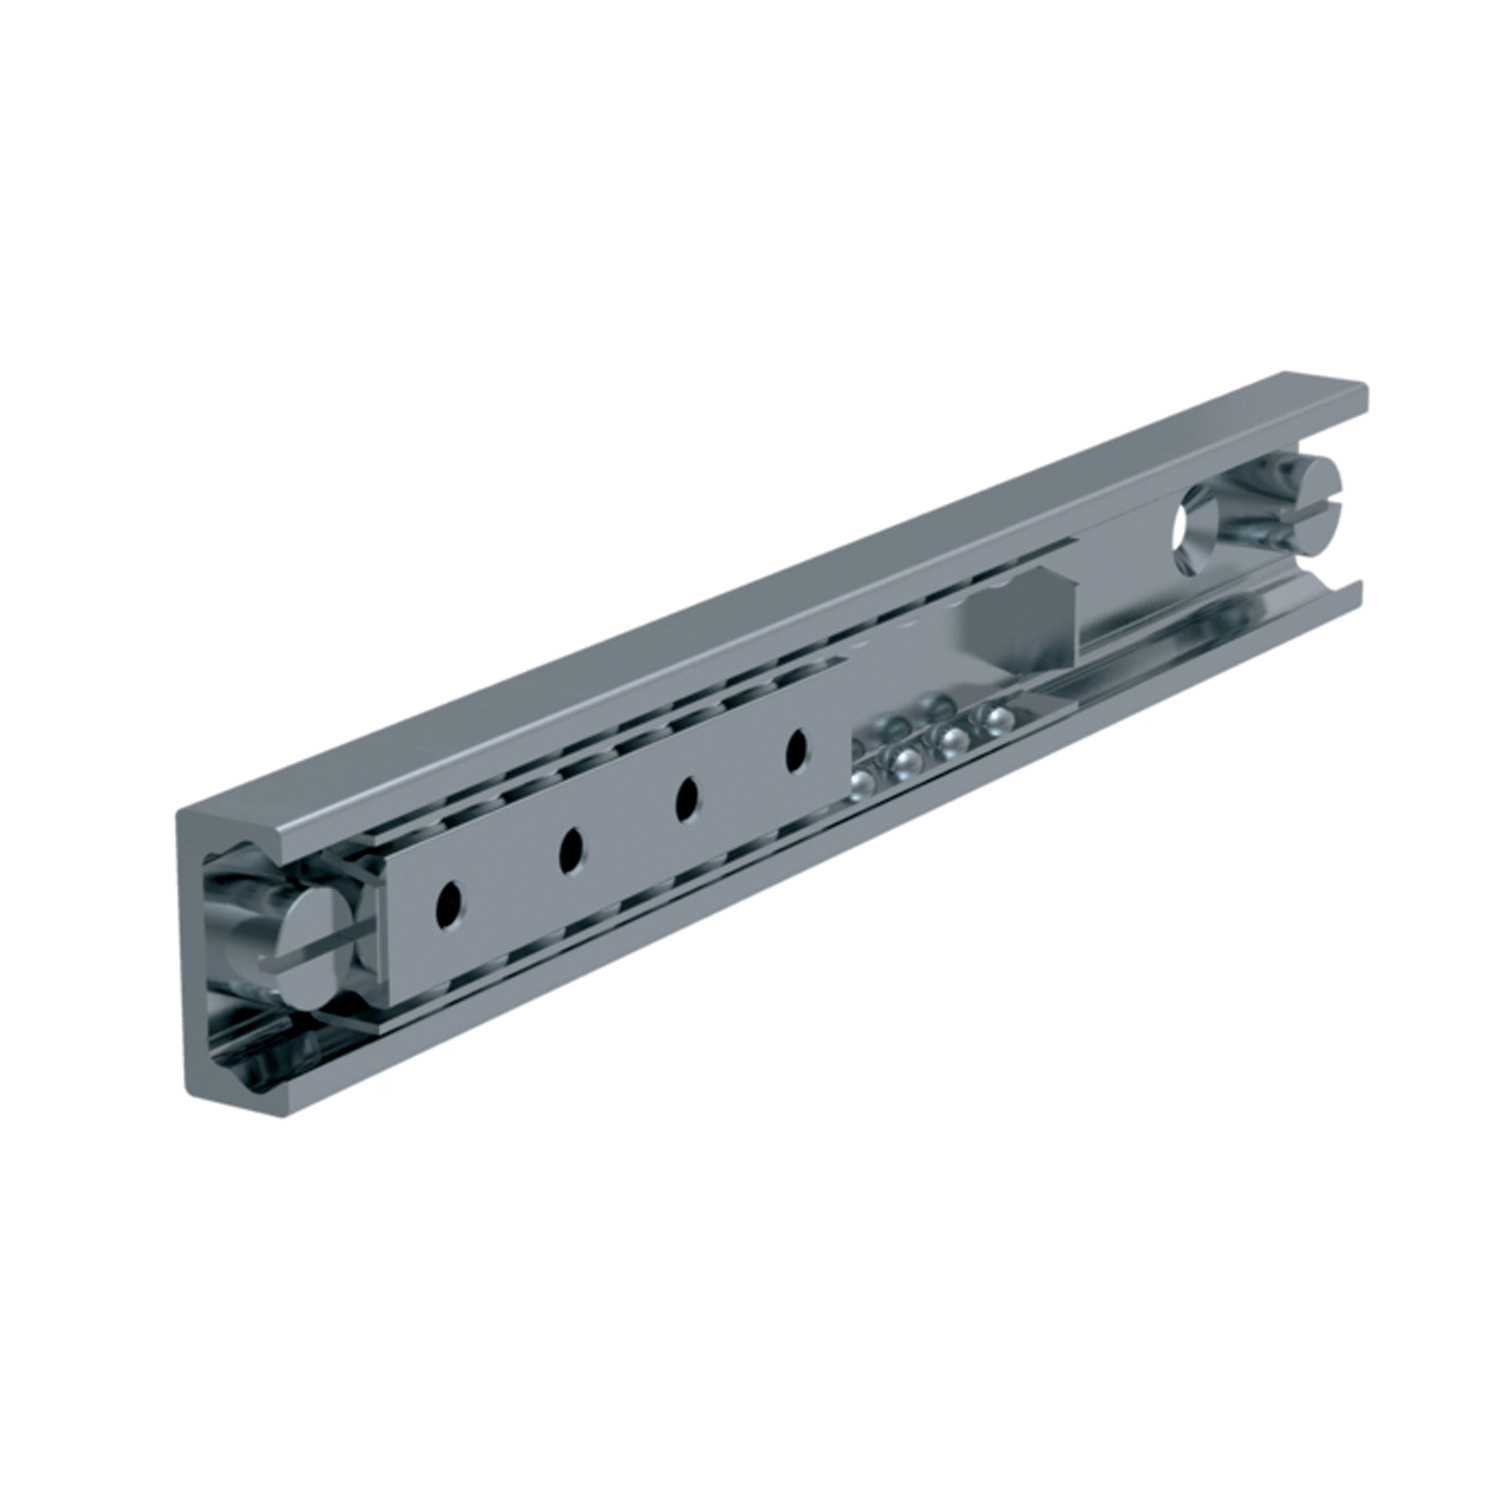 High Load Rails Easy slide high-load guideways come in sizes 28, 35, 43 or 63. They are made from zinc-plated steel with induction-hardened steel raceways.